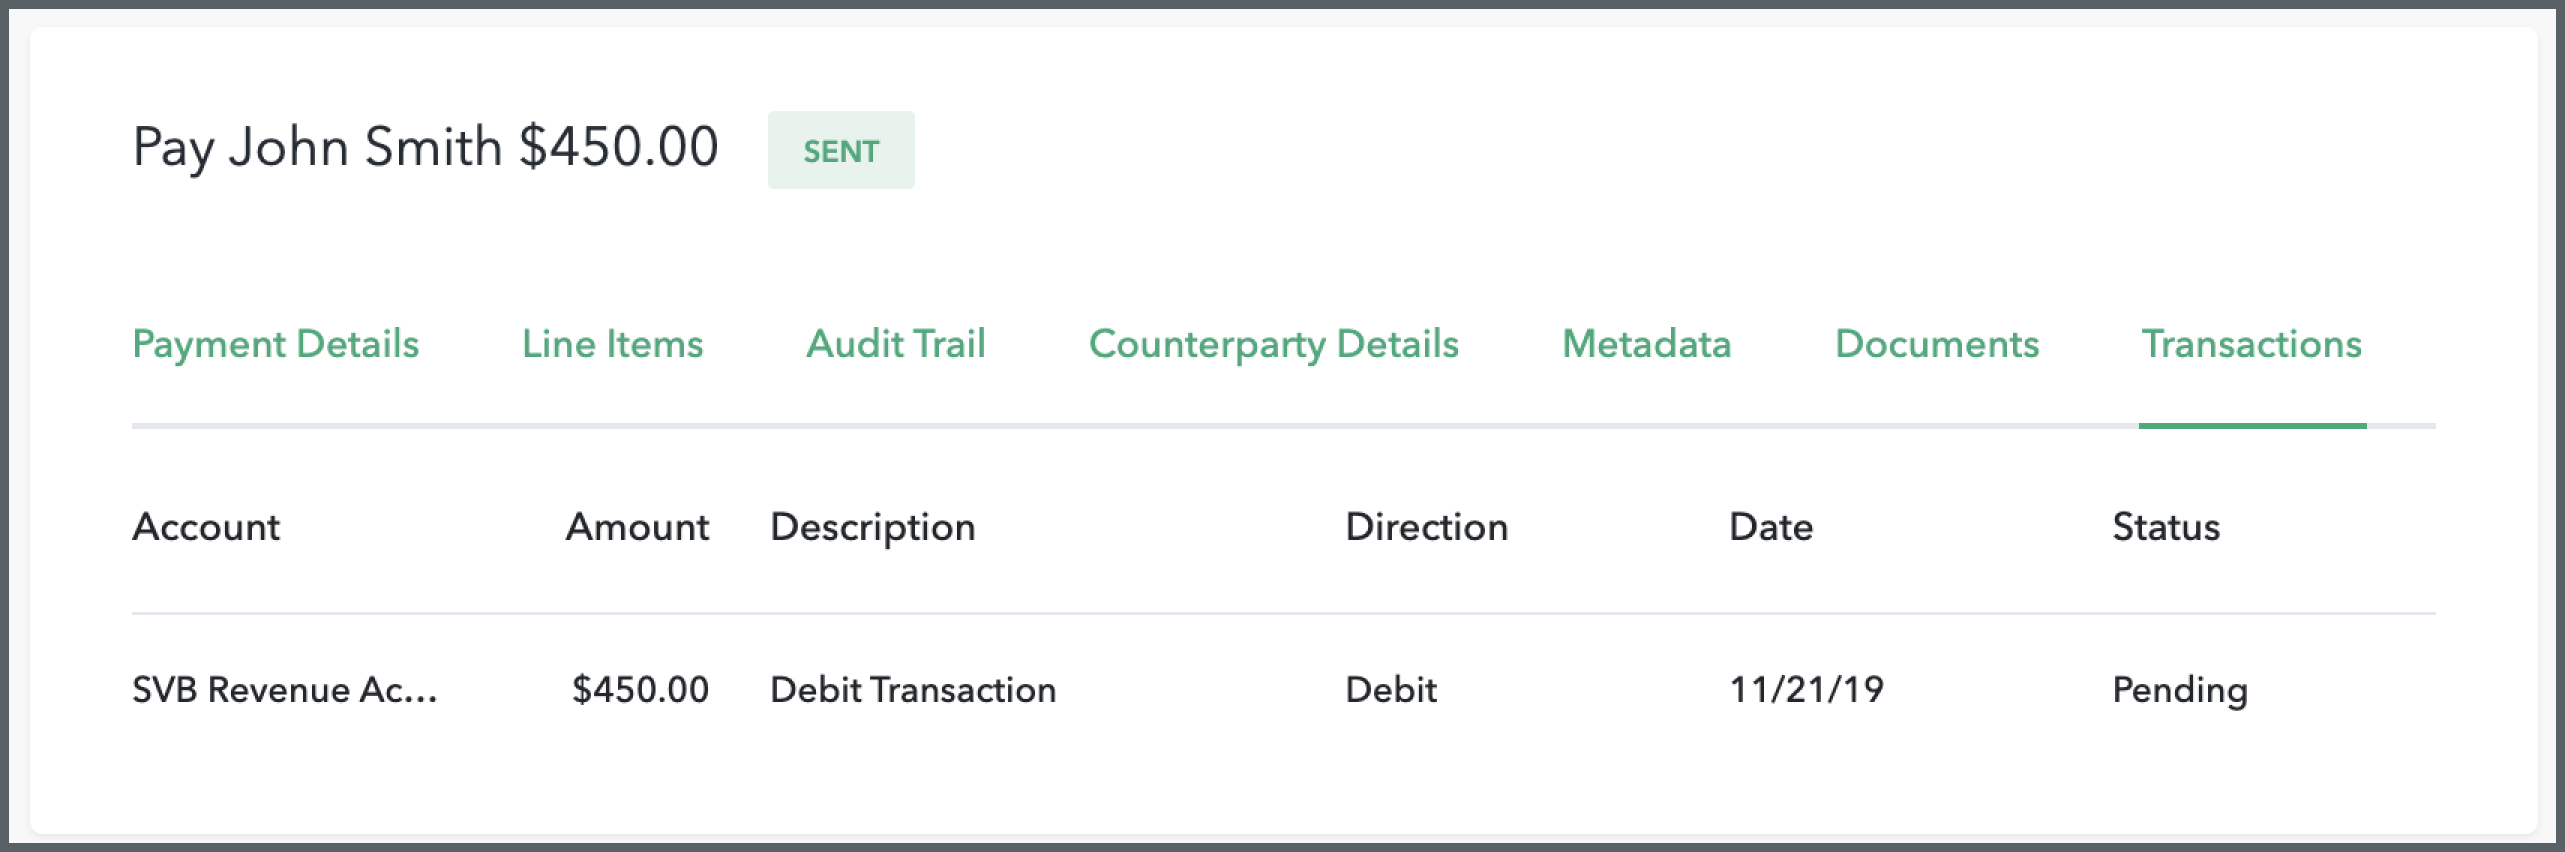 A new Transaction Status column has been added for reconciled Payment Orders.